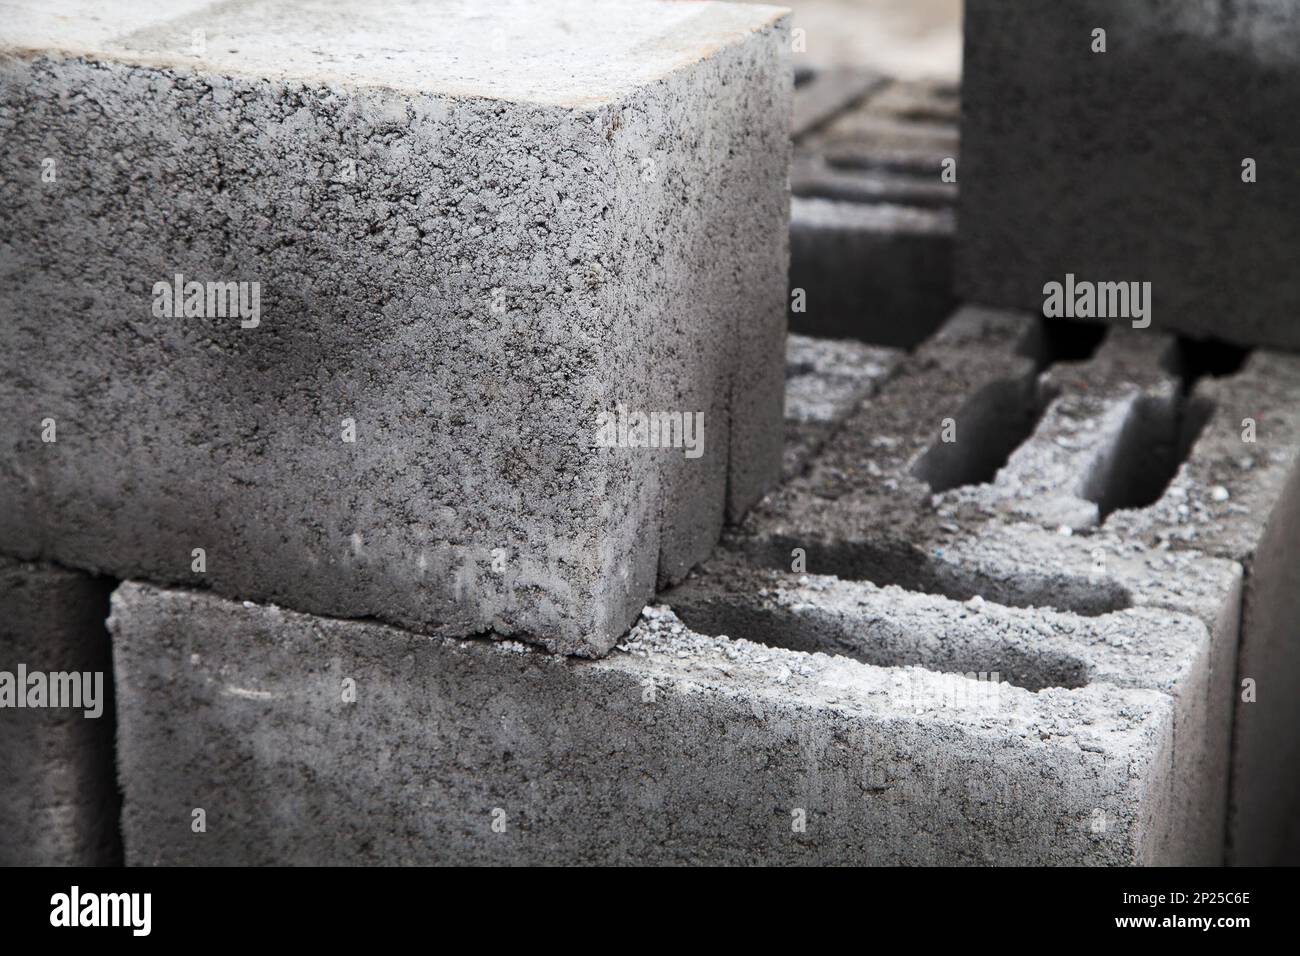 Gray building cinder blocks made of cement stacked close-up. A lot of large concrete bricks stacking texture. Shallow focus Stock Photo